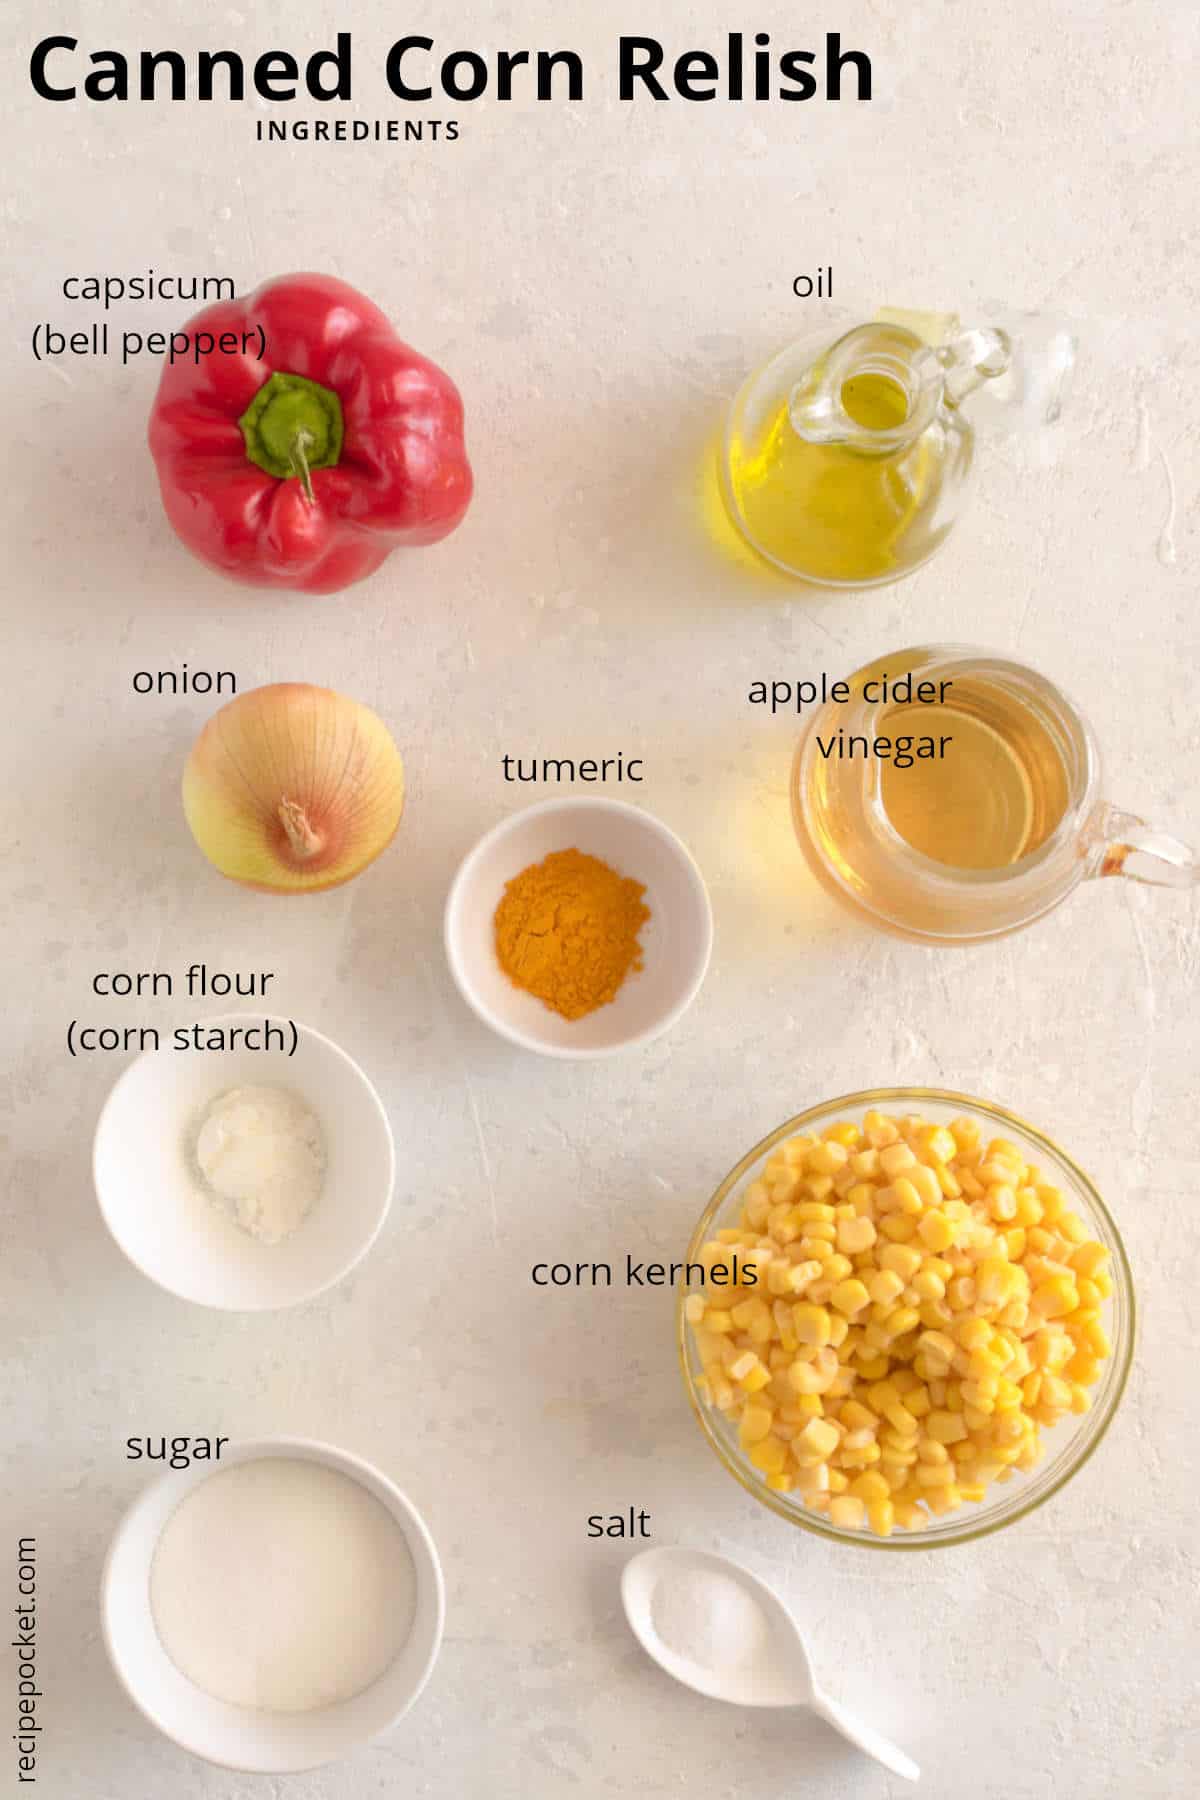 Images showing the ingredients needed for the canned corn relish recipe.